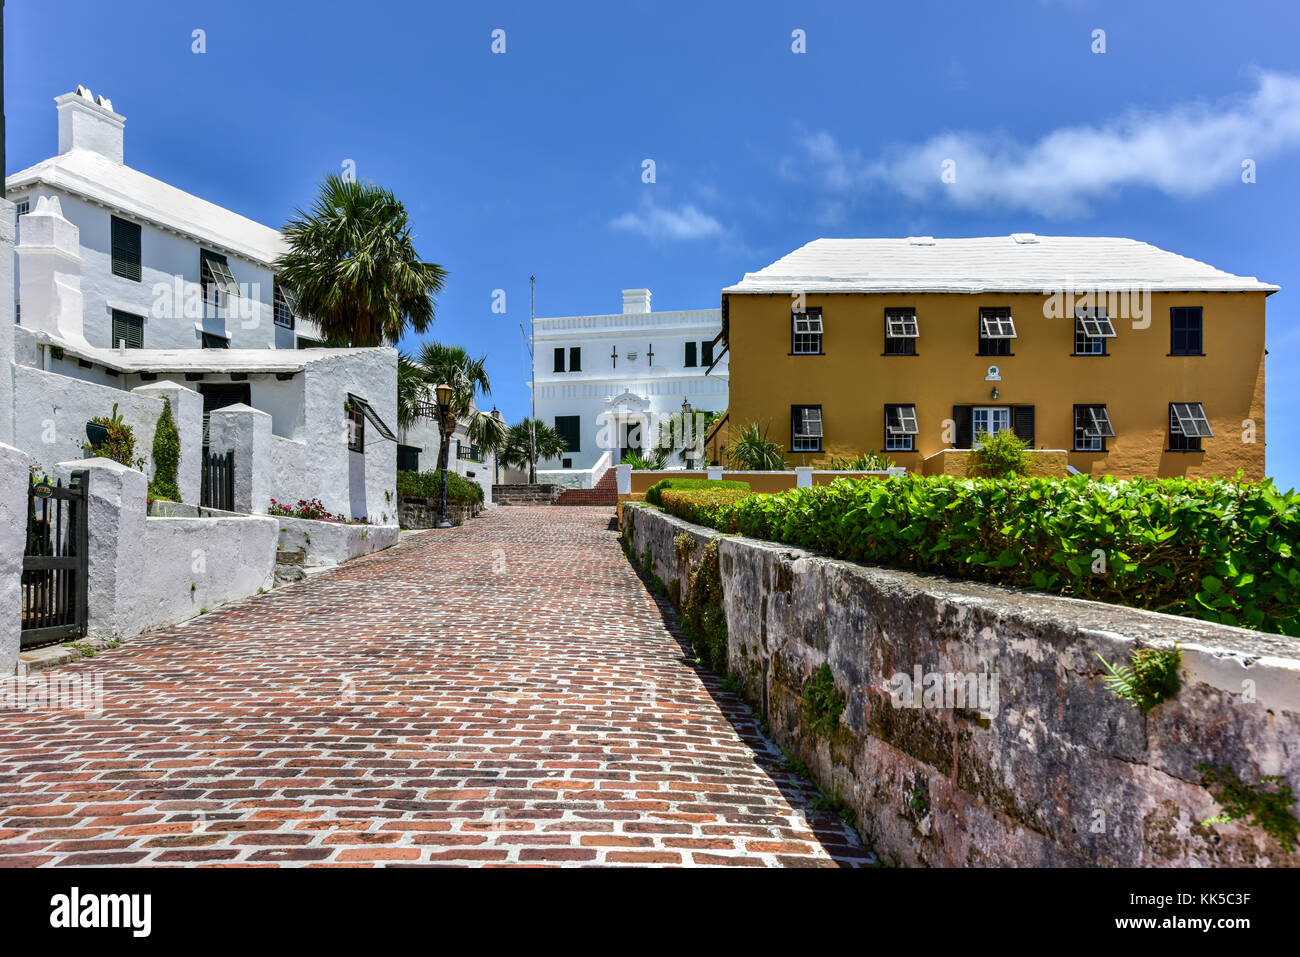 The State House in St. George's, home of Bermuda's parliament from 1620-1815. It is the oldest surviving Bermudian building. Stock Photo